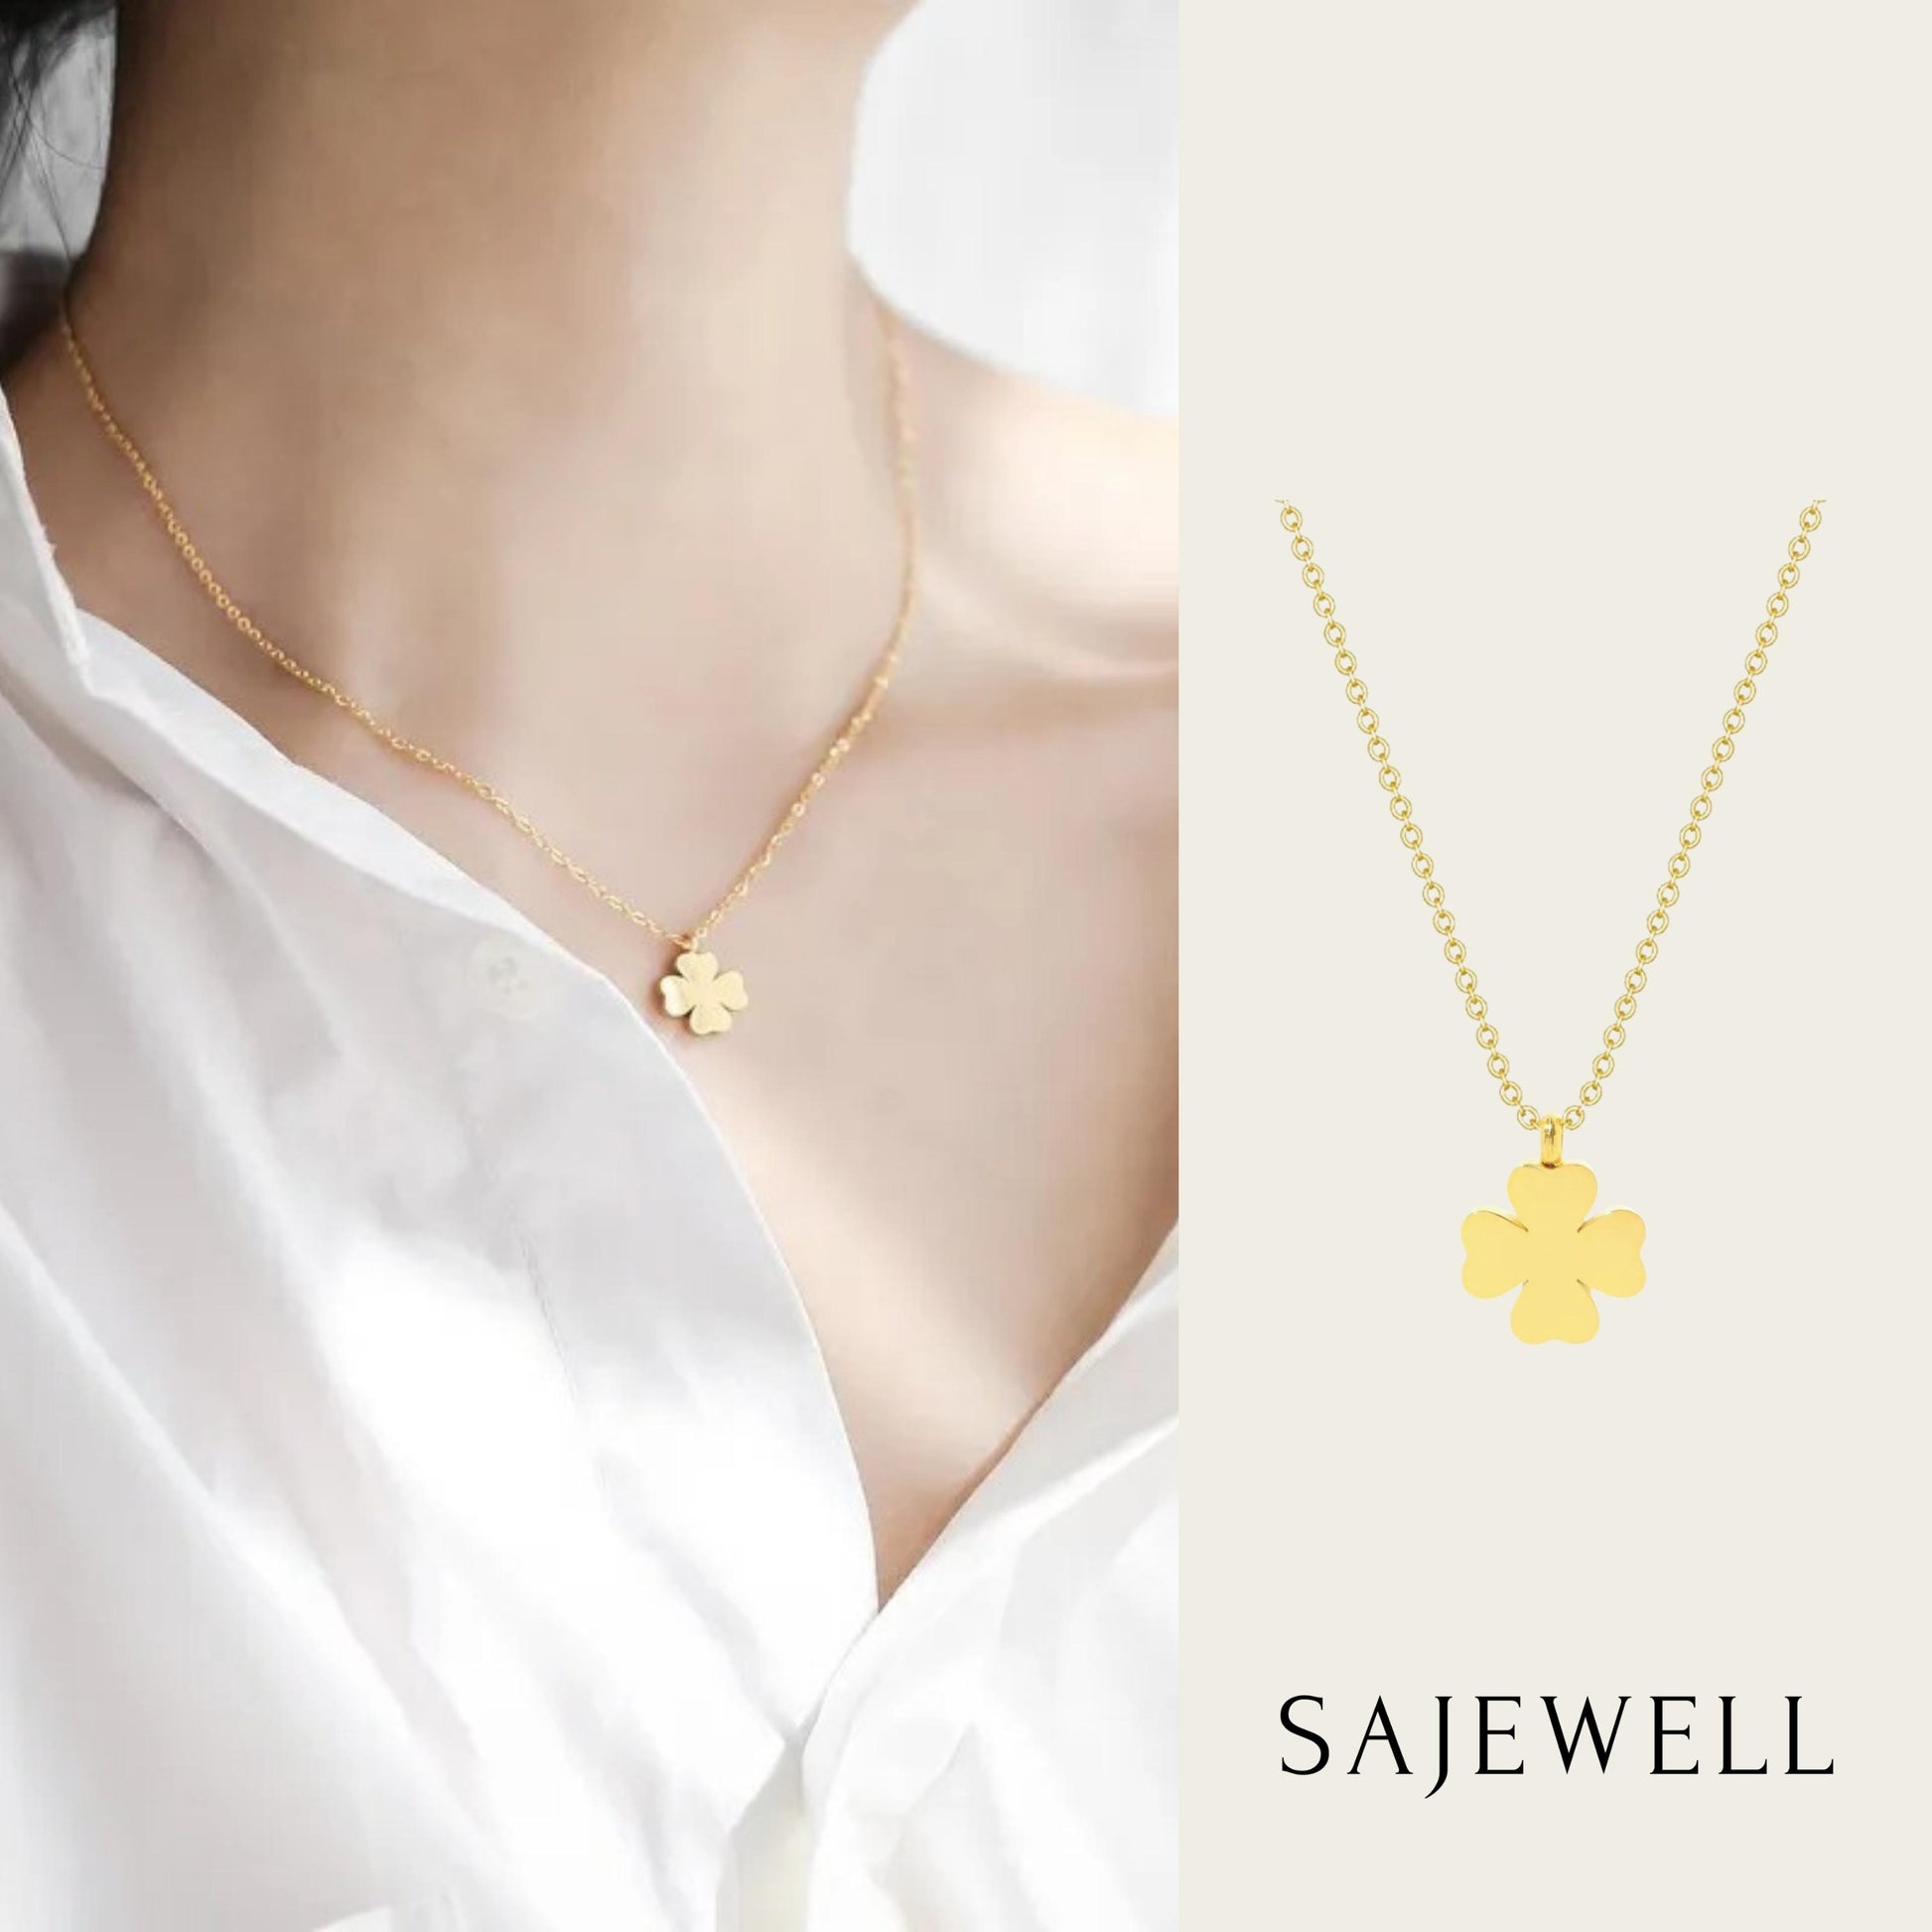       TT500037 Sajewell Titanium Steel 18K Gold Plated Flat Cloverleaf Jewelry Set_necklace and earrings